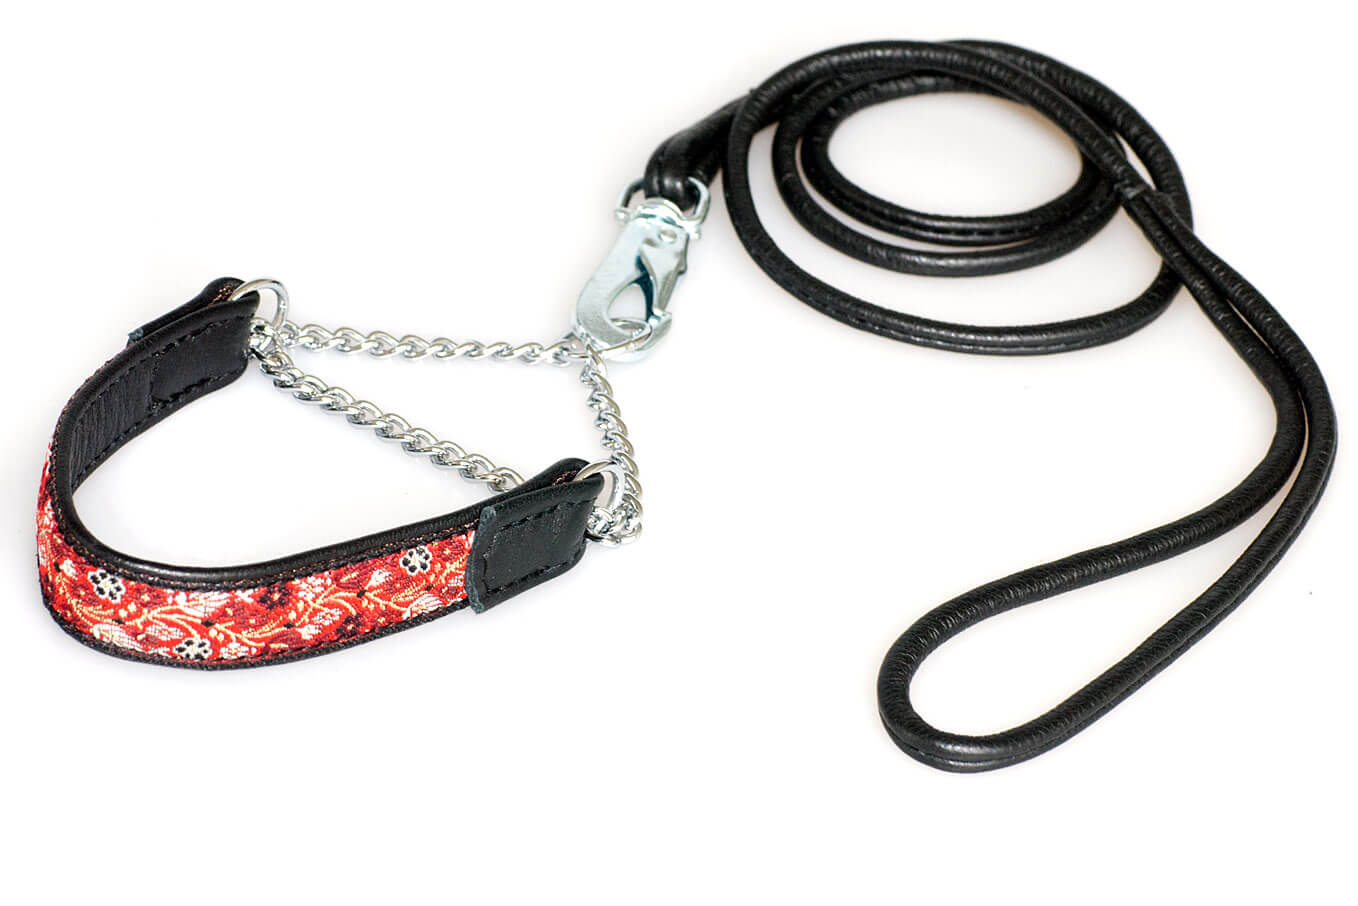 Black nappa leather double stitched lead to match ribbon collars